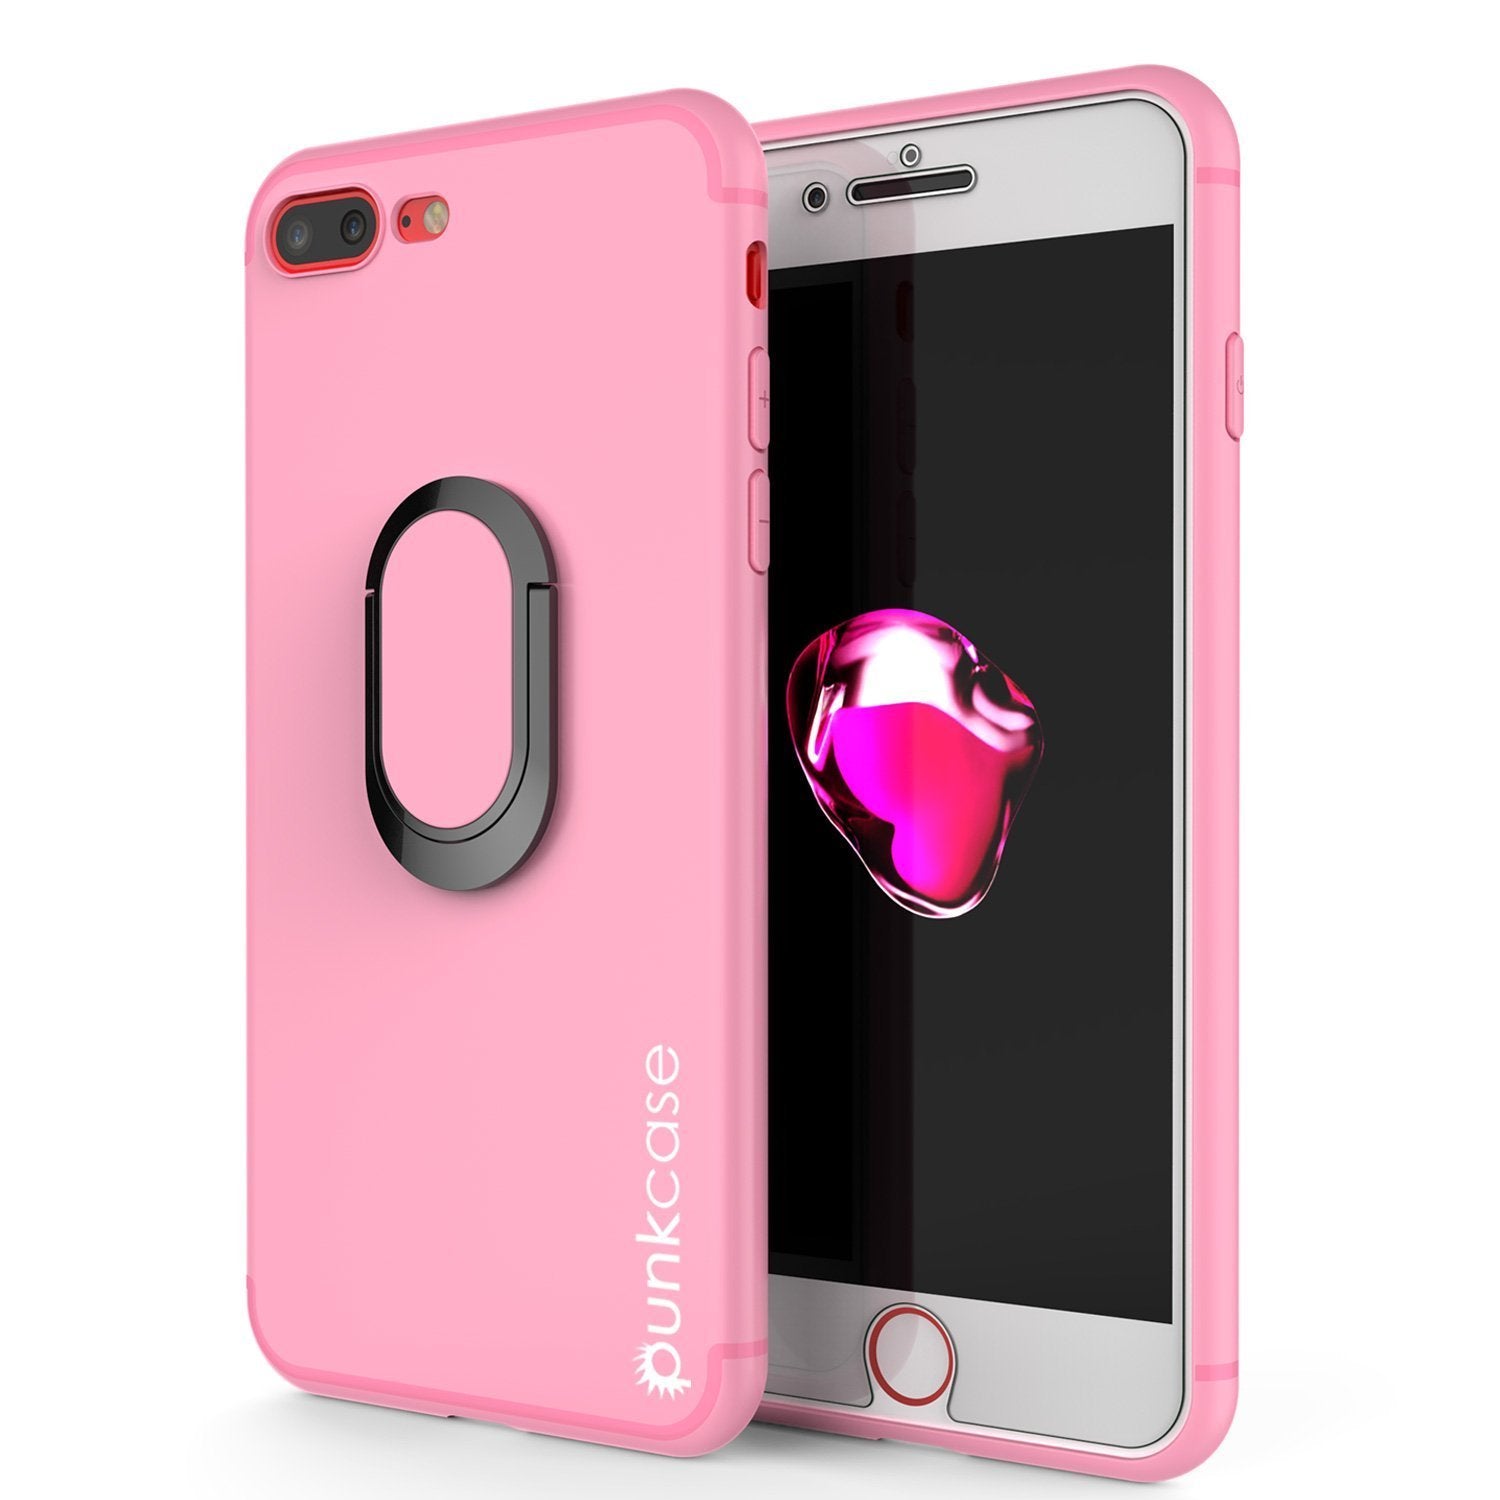 iPhone 8 Plus Case, Punkcase Magnetix Protective TPU Cover W/ Kickstand, Ring Grip Holder & Metal Plate for Magnetic Car Phone Mount PLUS Tempered Glass Screen Protector for Apple iPhone 7+/8+ [Pink]